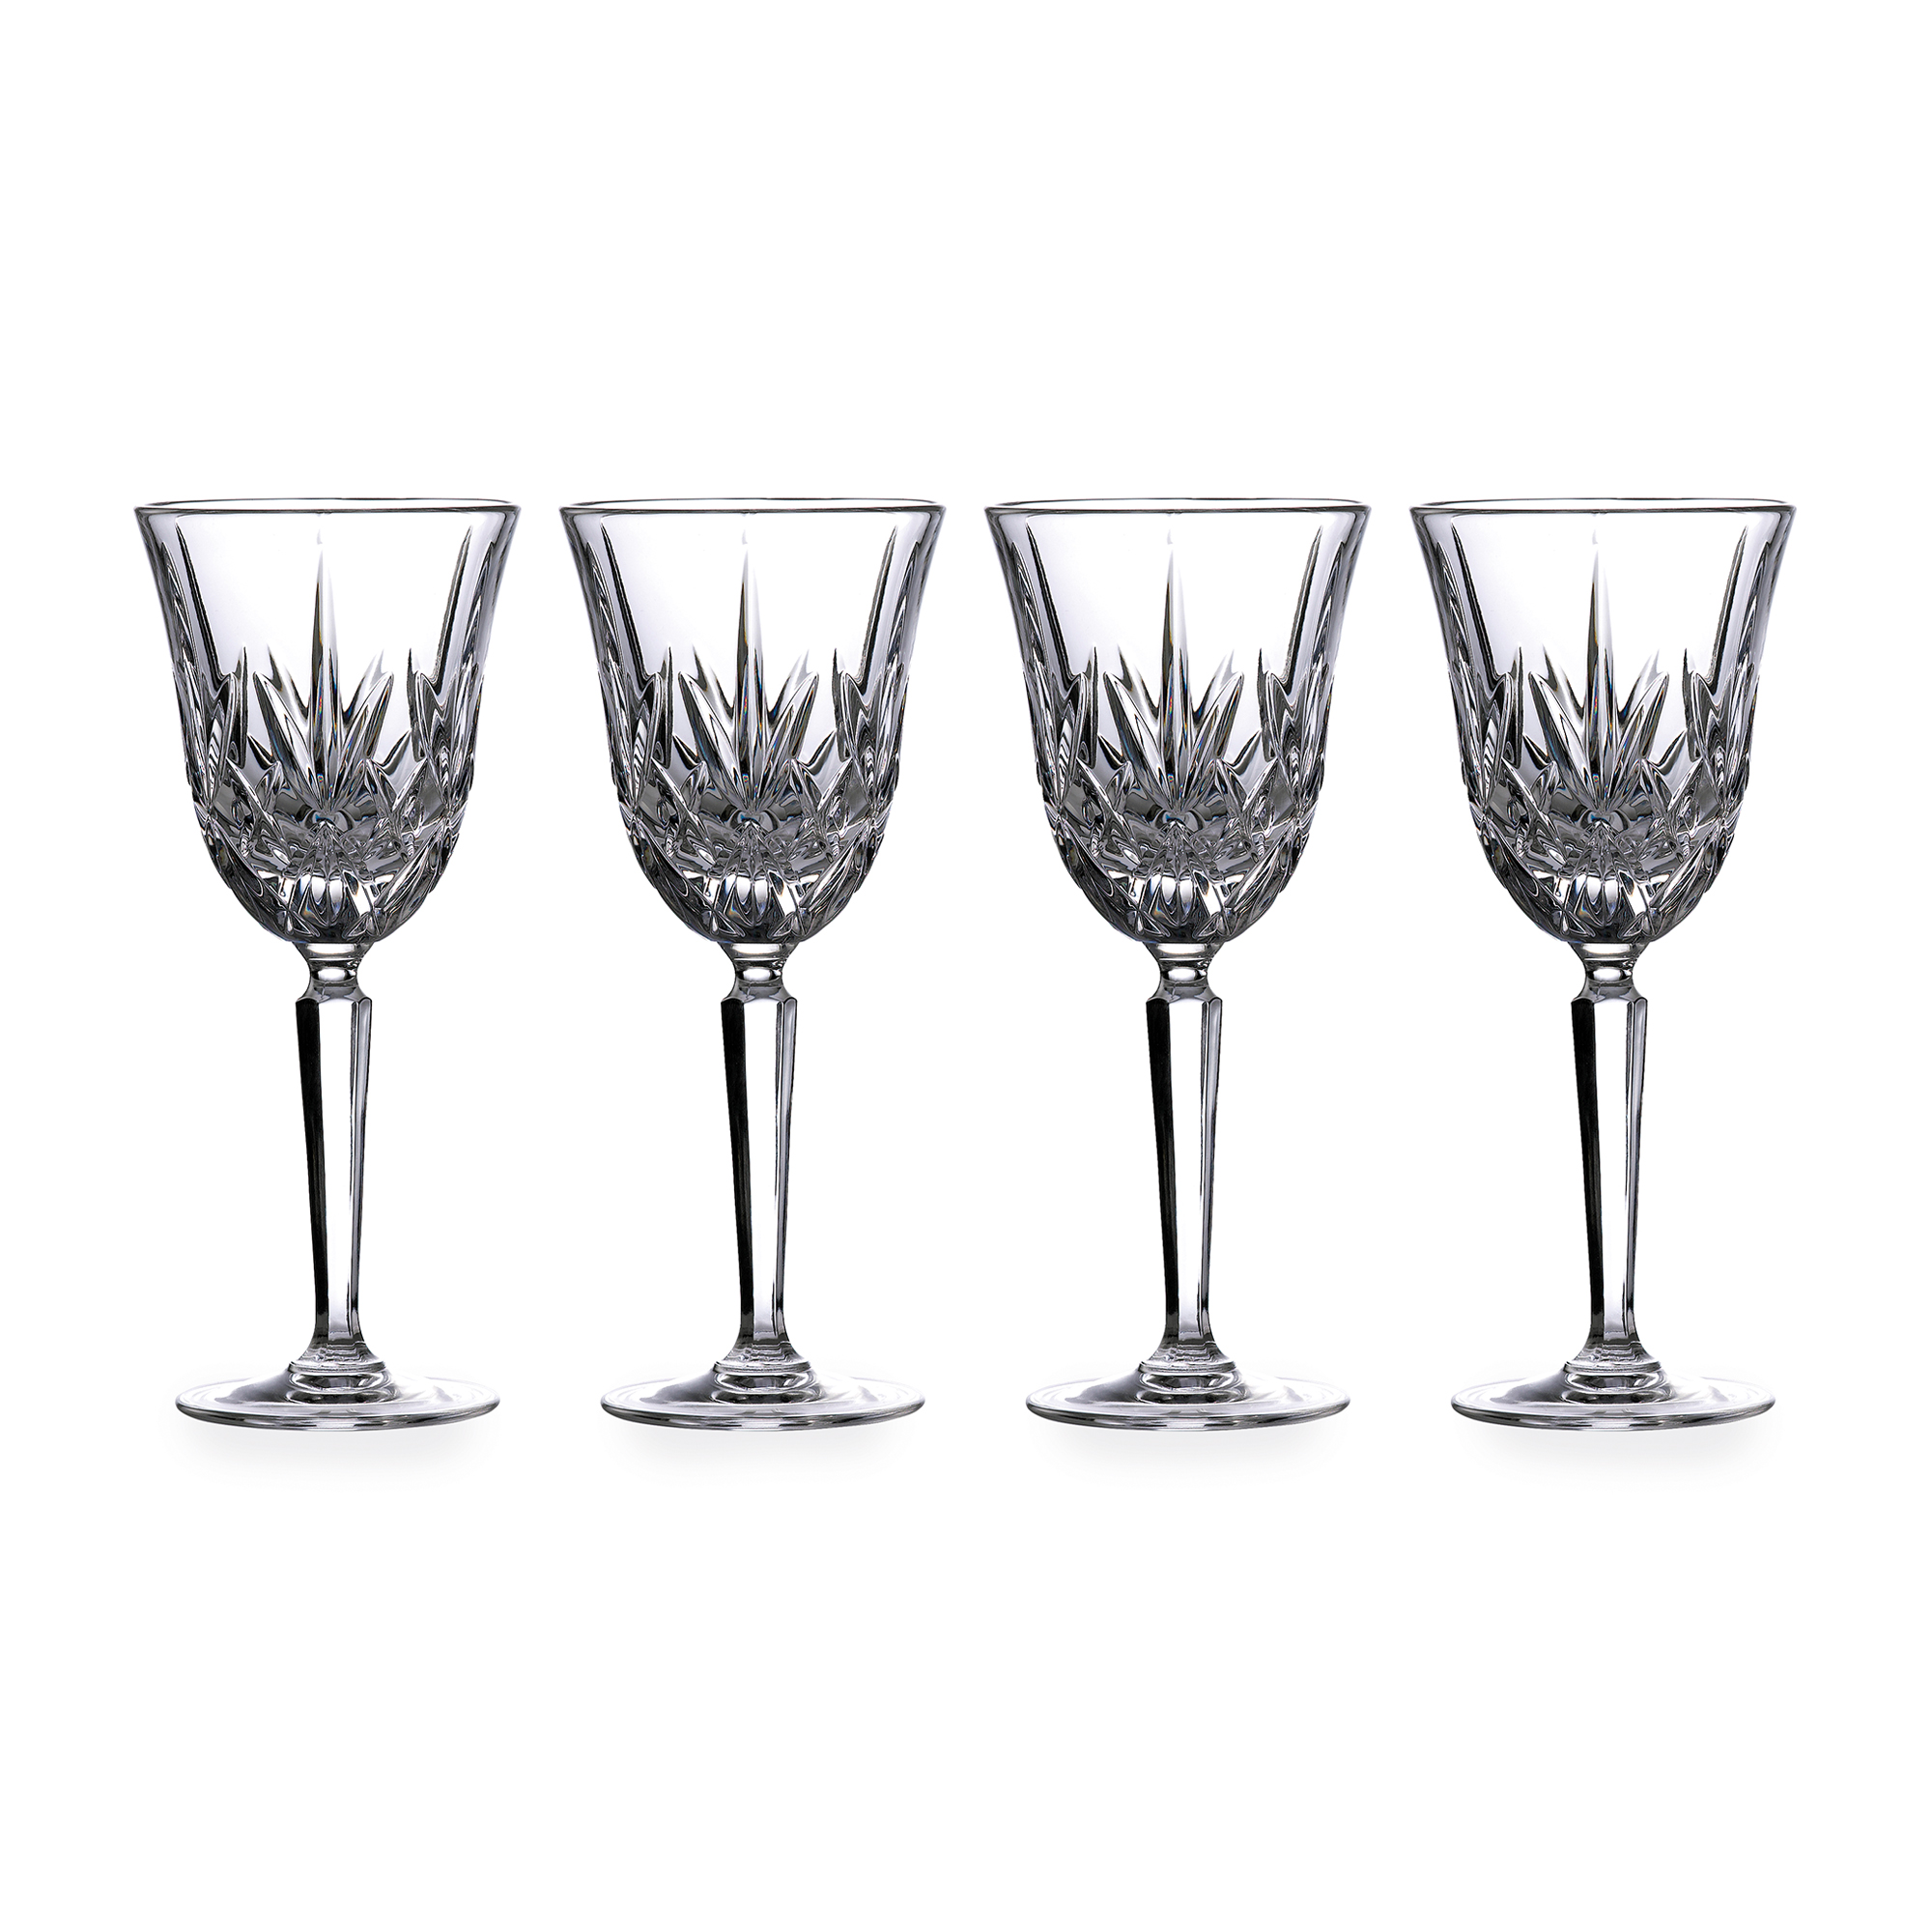 Marquis by Waterford Crystal "Maxwell" Set of 4 Wine Glasses from Italy |  Ross-Simons